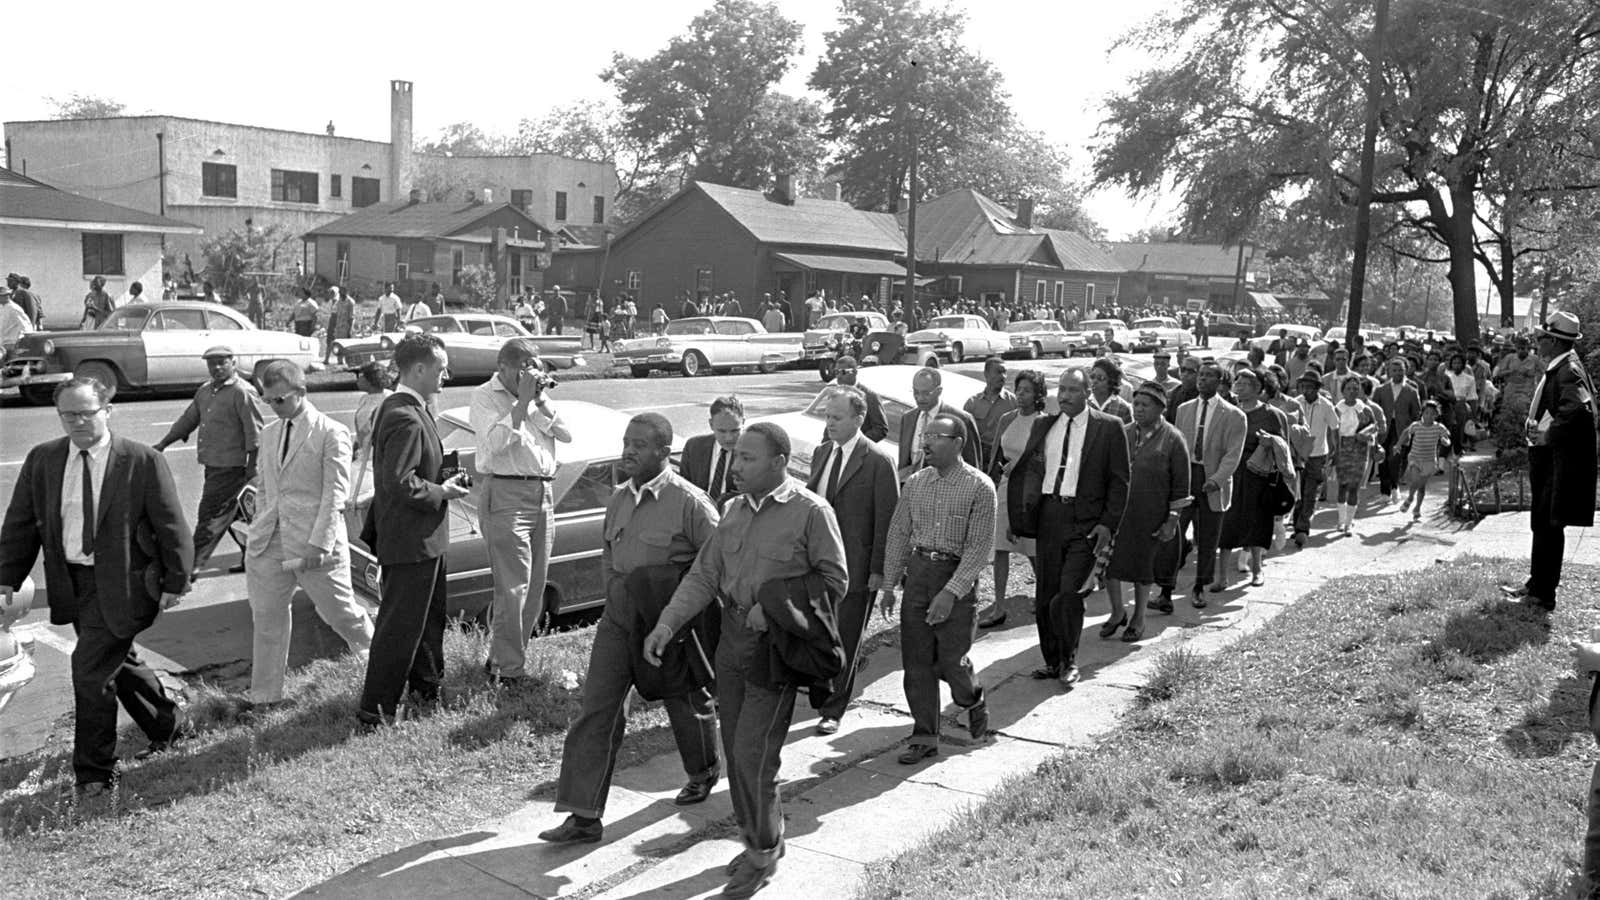 Rev. Ralph Abernathy, left, and Rev. Martin Luther King Jr. lead the march to Birmingham, Alabama’s city hall, which led to his arrest, on April 12, 1963.